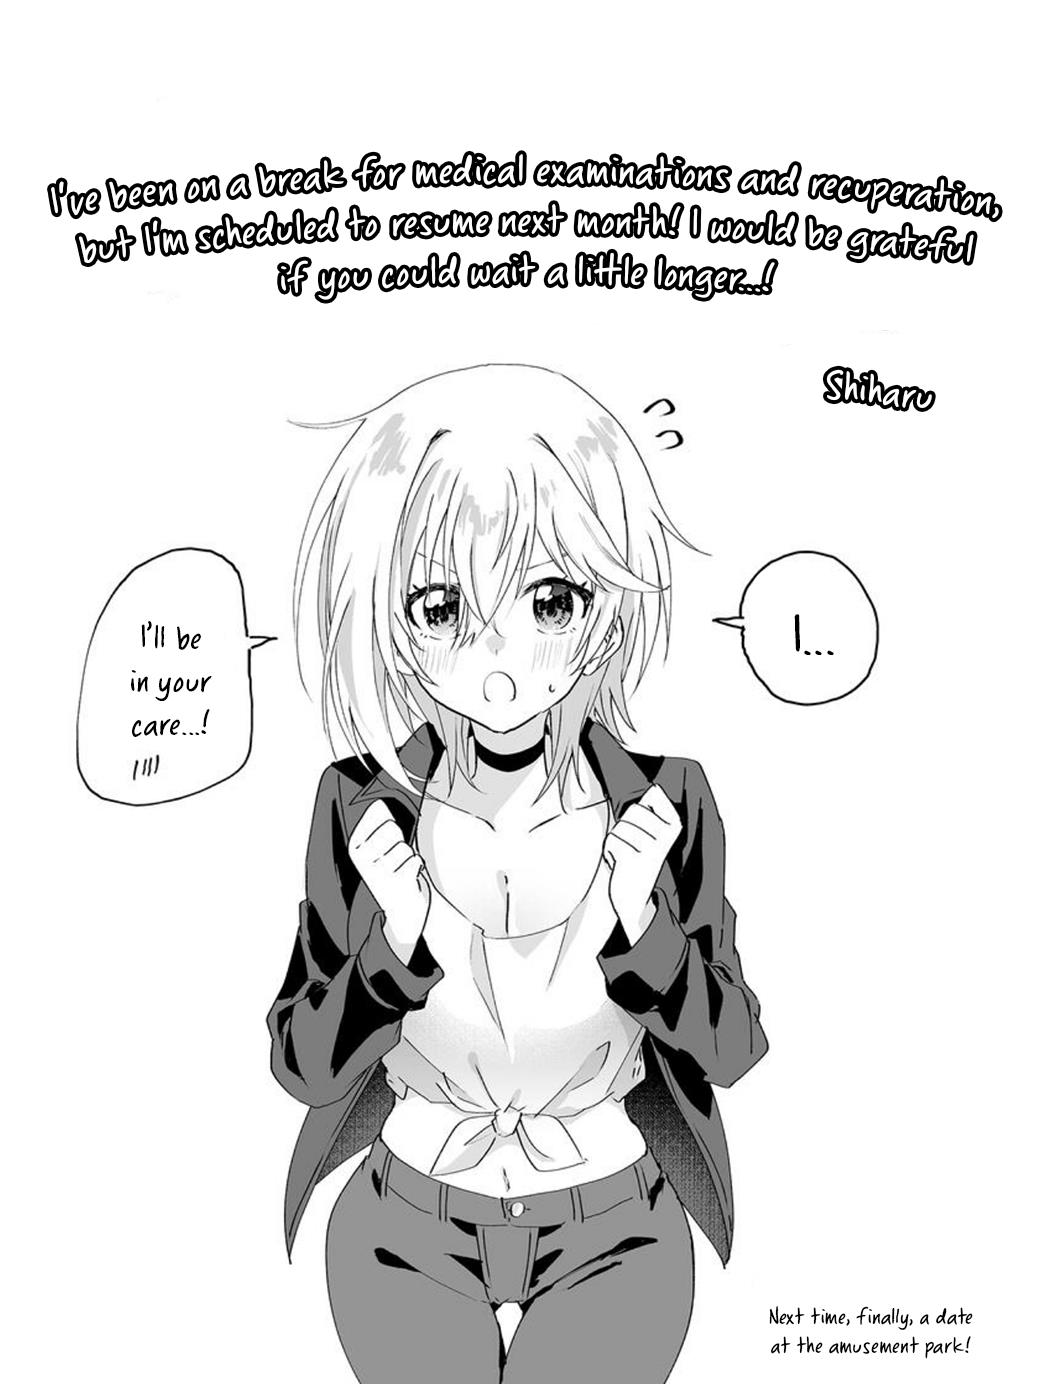 Since I’Ve Entered The World Of Romantic Comedy Manga, I’Ll Do My Best To Make The Losing Heroine Happy Vol.1 Chapter 6.65: Resumption Annoucement - Picture 1